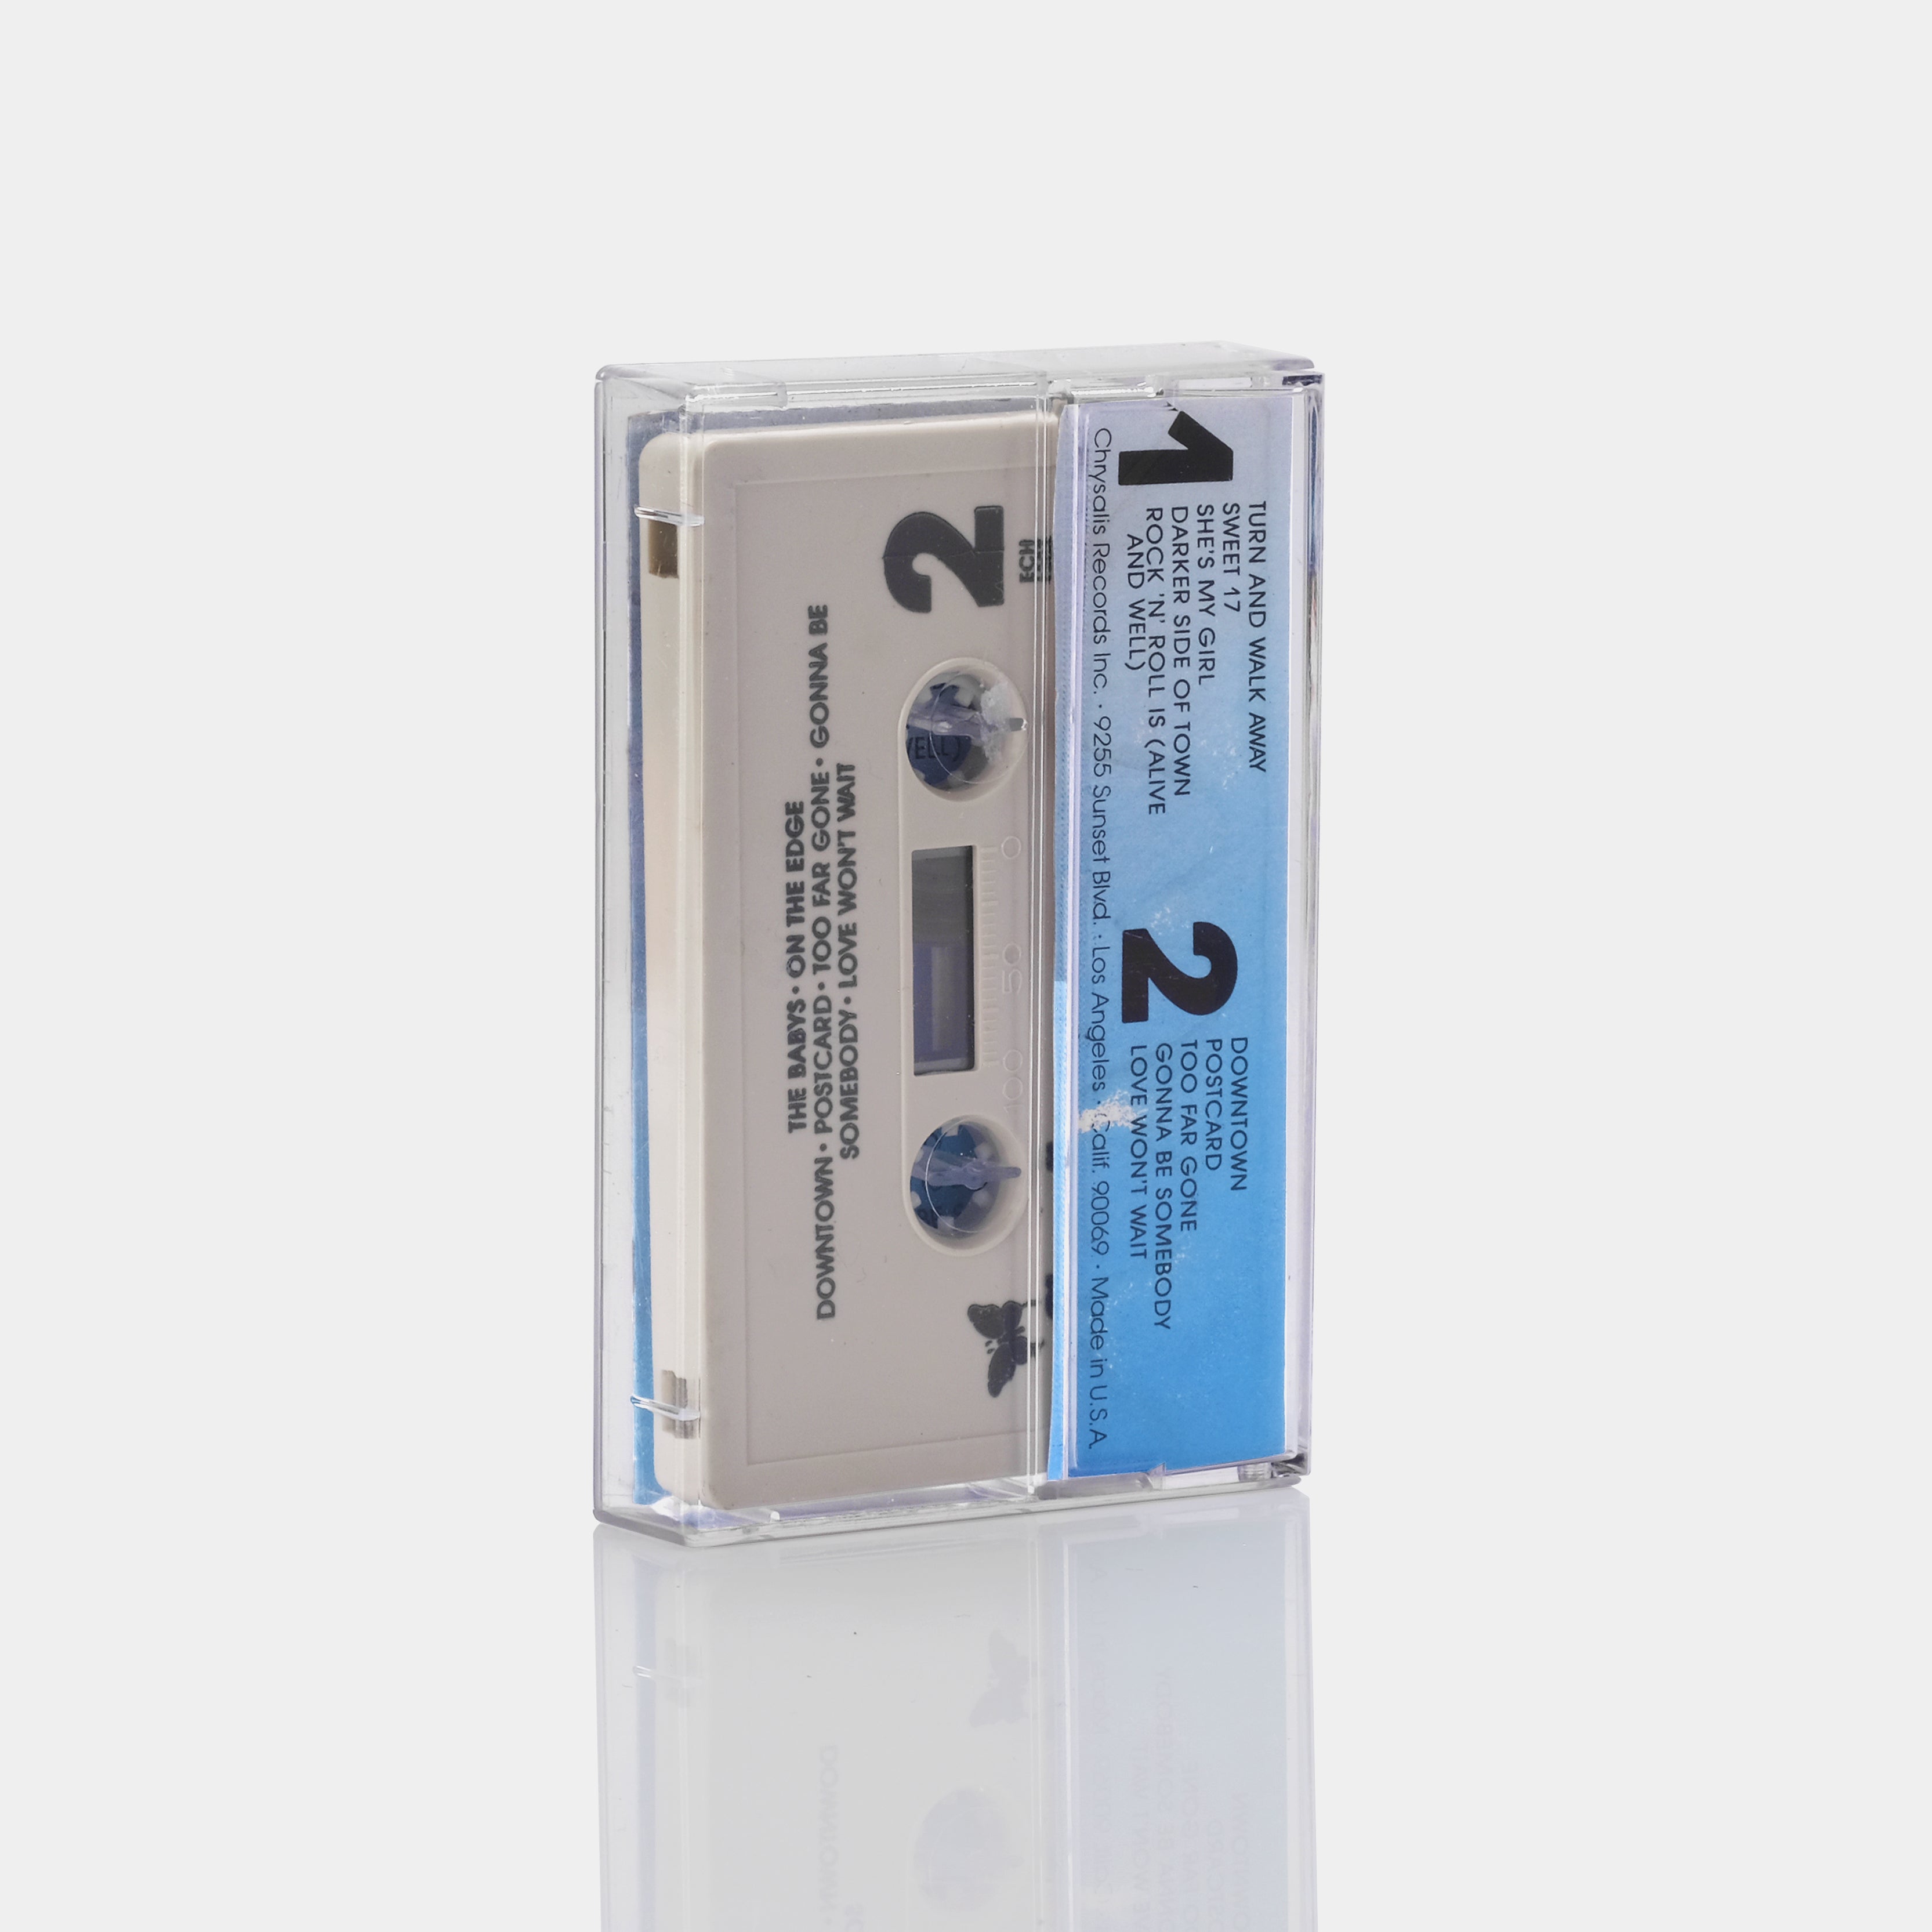 The Baby's - On The Edge Cassette Tape